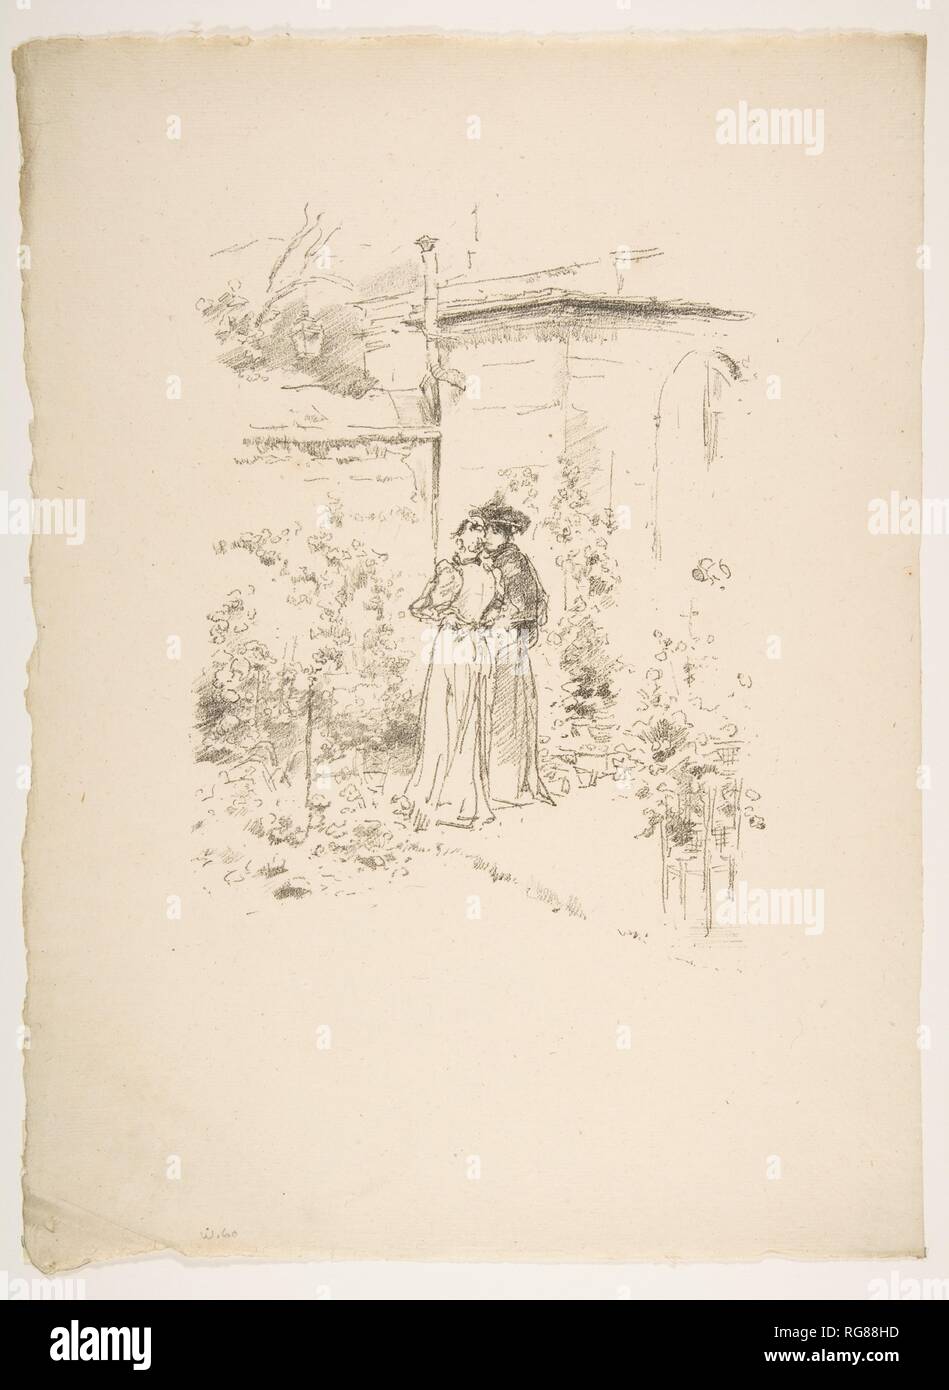 Confidences in the Garden. Artist: James McNeill Whistler (American, Lowell, Massachusetts 1834-1903 London). Dimensions: Image: 8 3/8 × 6 5/16 in. (21.2 × 16 cm)  Sheet: 13 1/8 × 9 11/16 in. (33.3 × 24.6 cm). Date: 1894. Museum: Metropolitan Museum of Art, New York, USA. Stock Photo